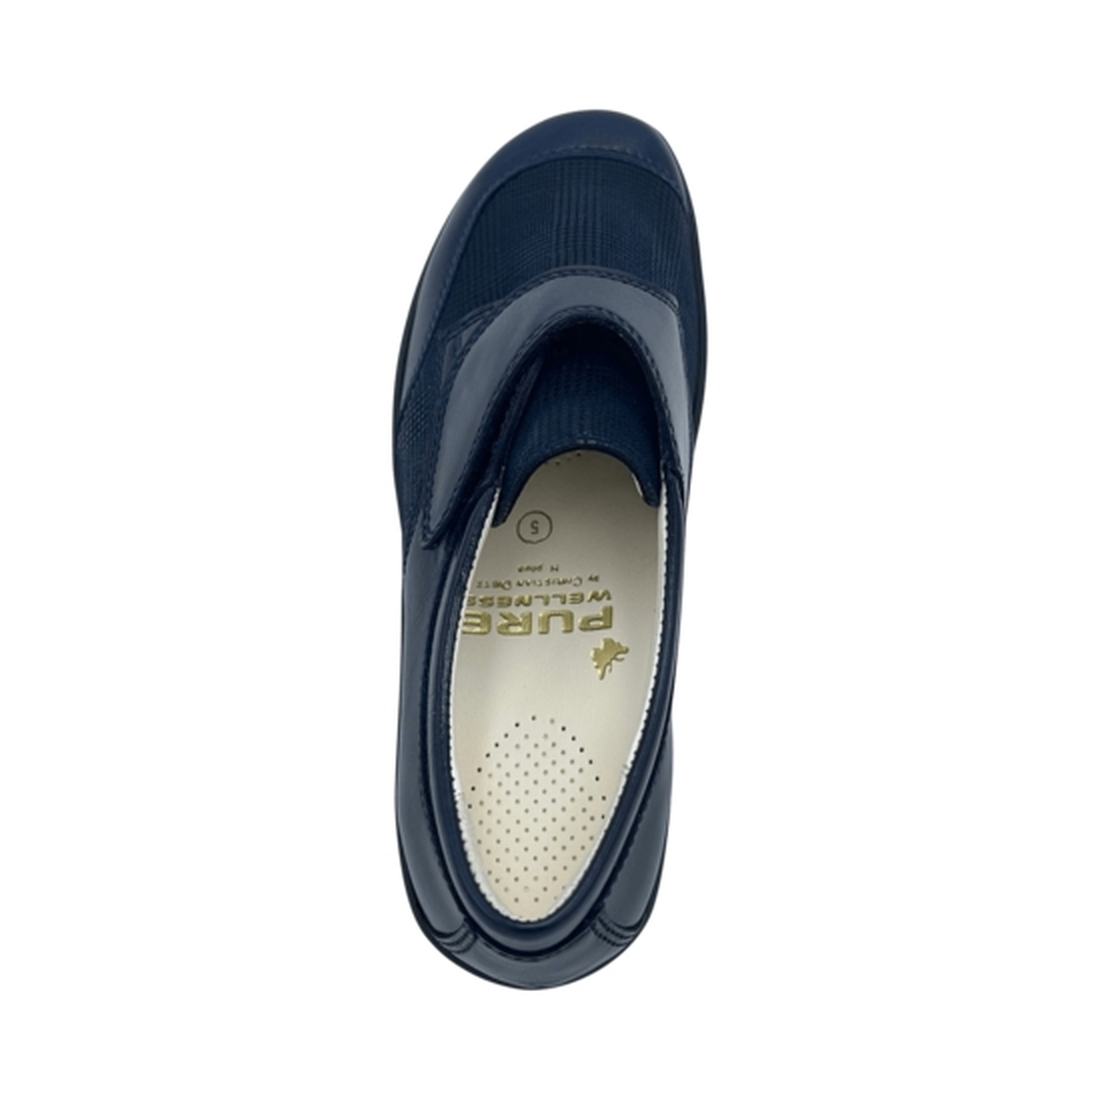 Locanno Navy smooth leather